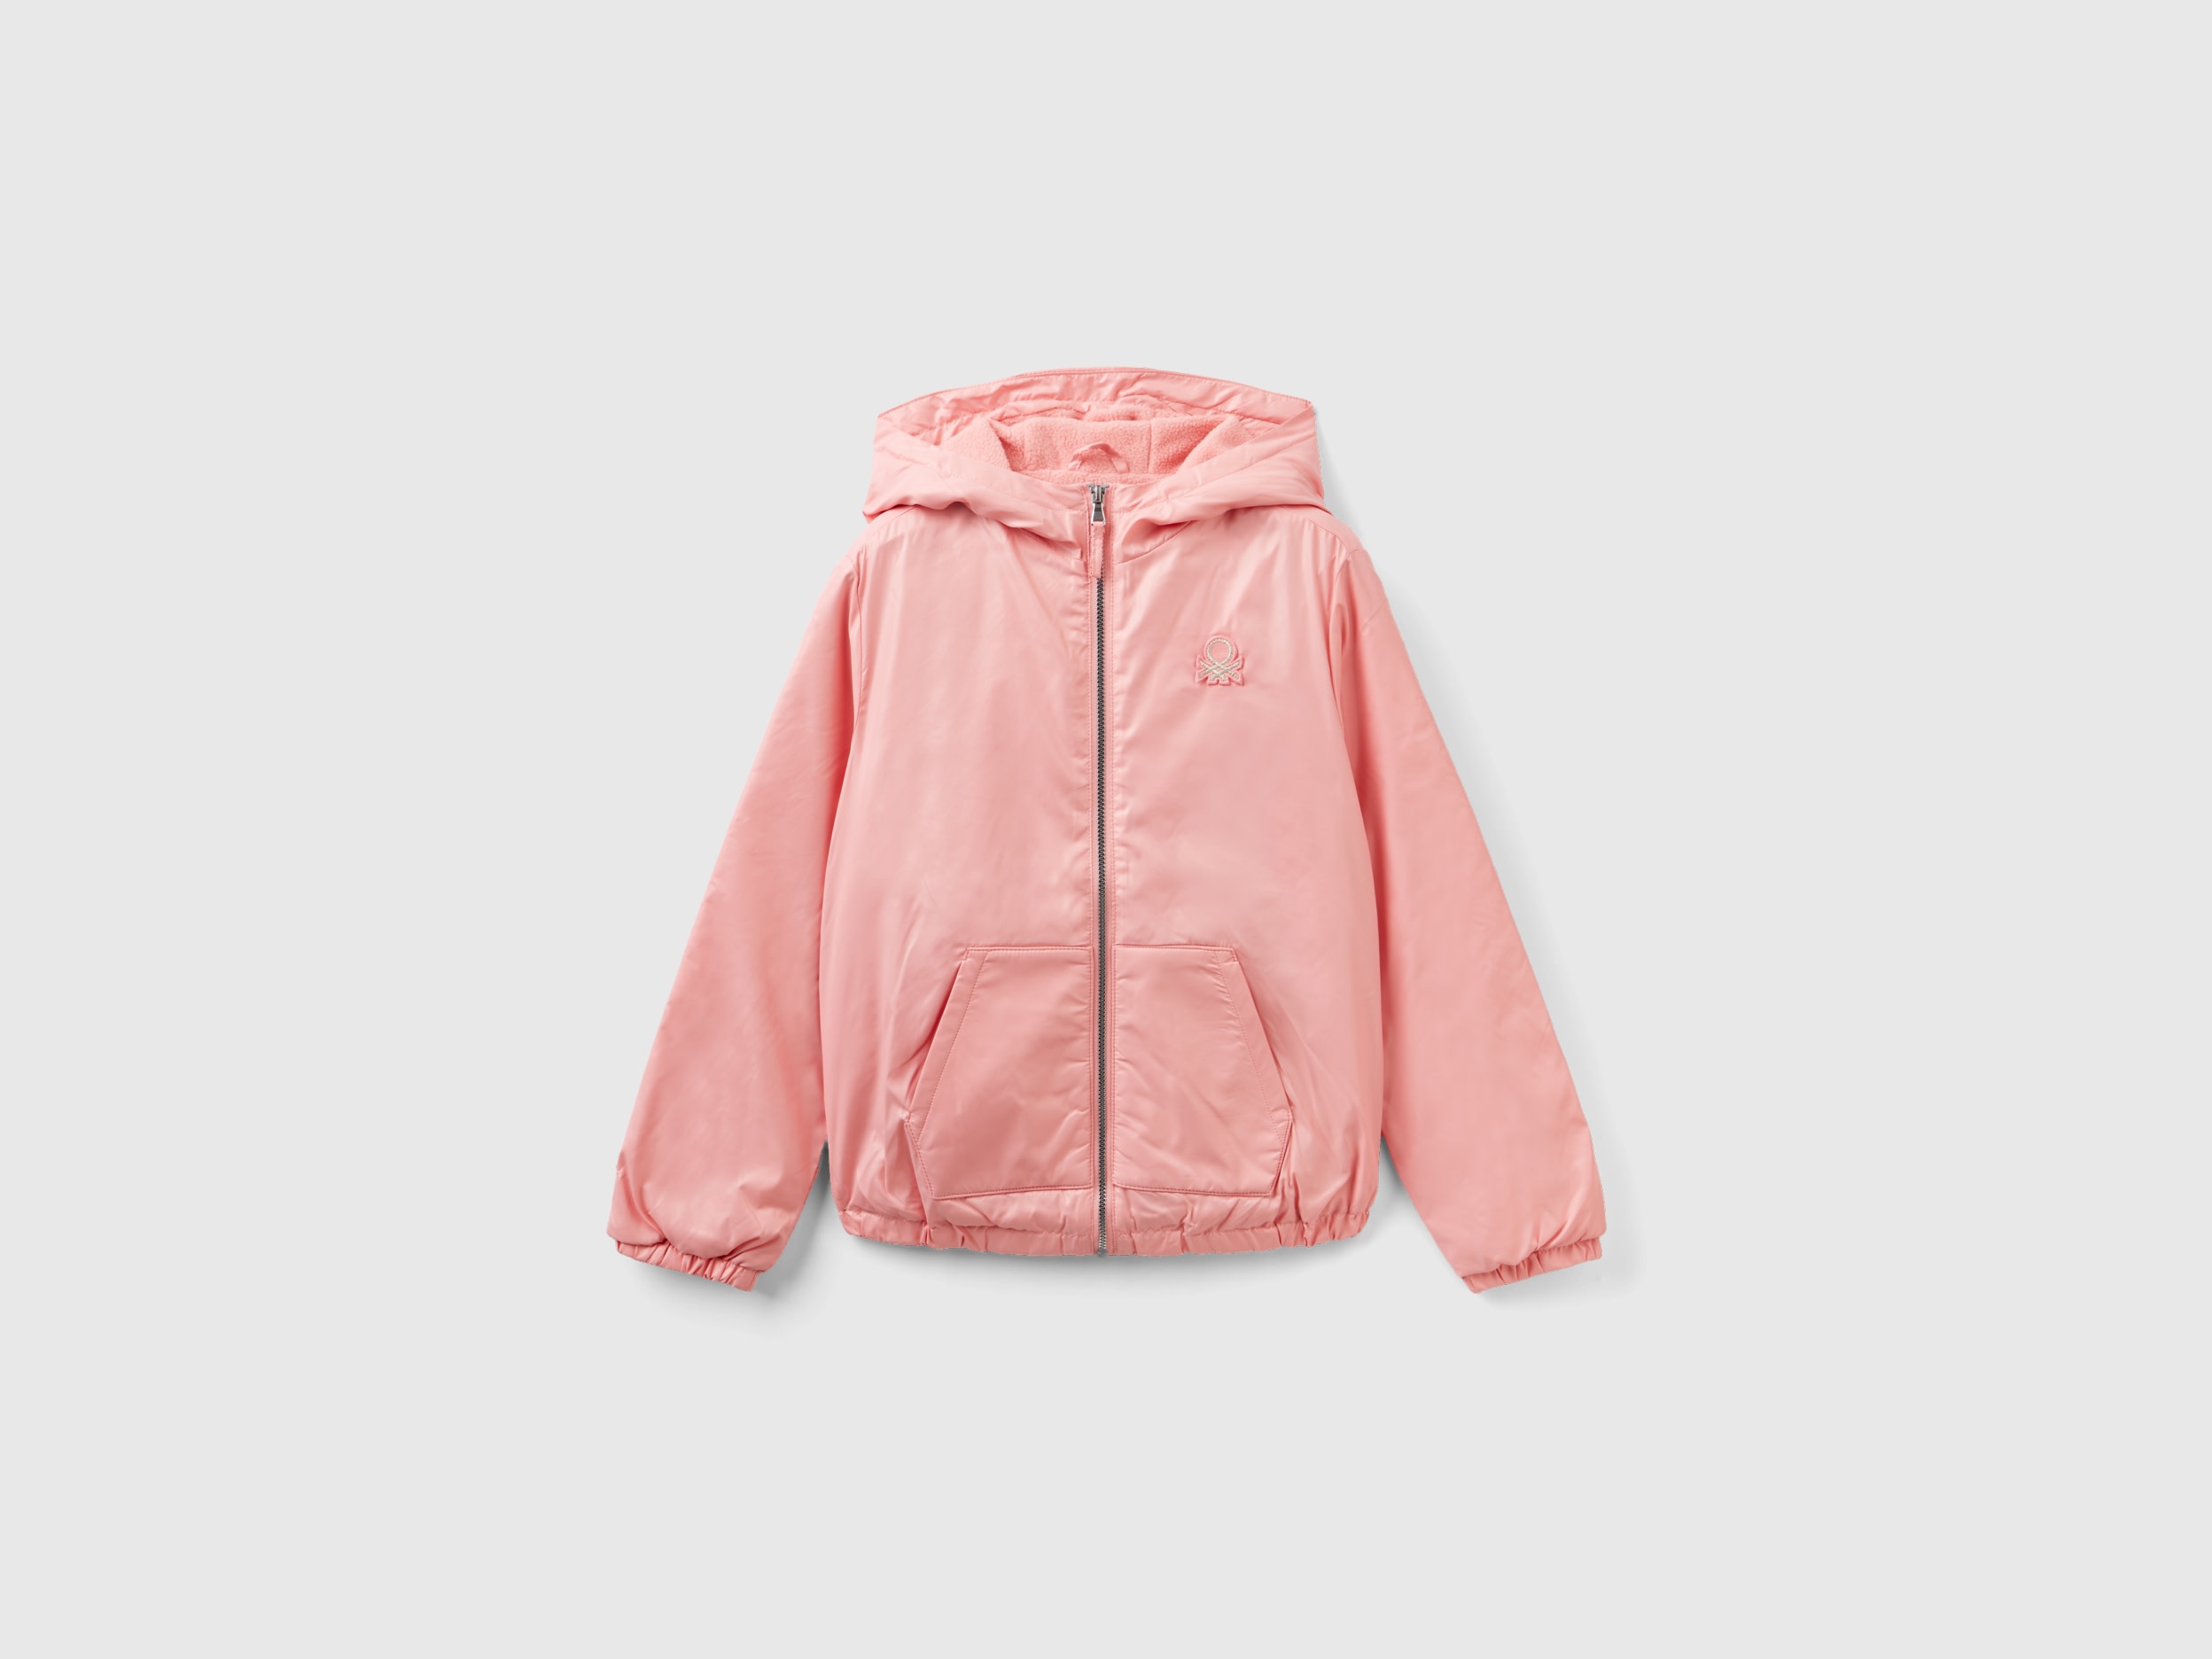 Benetton, Glossy Jacket With Zip And Hood, size 2XL, Pink, Kids